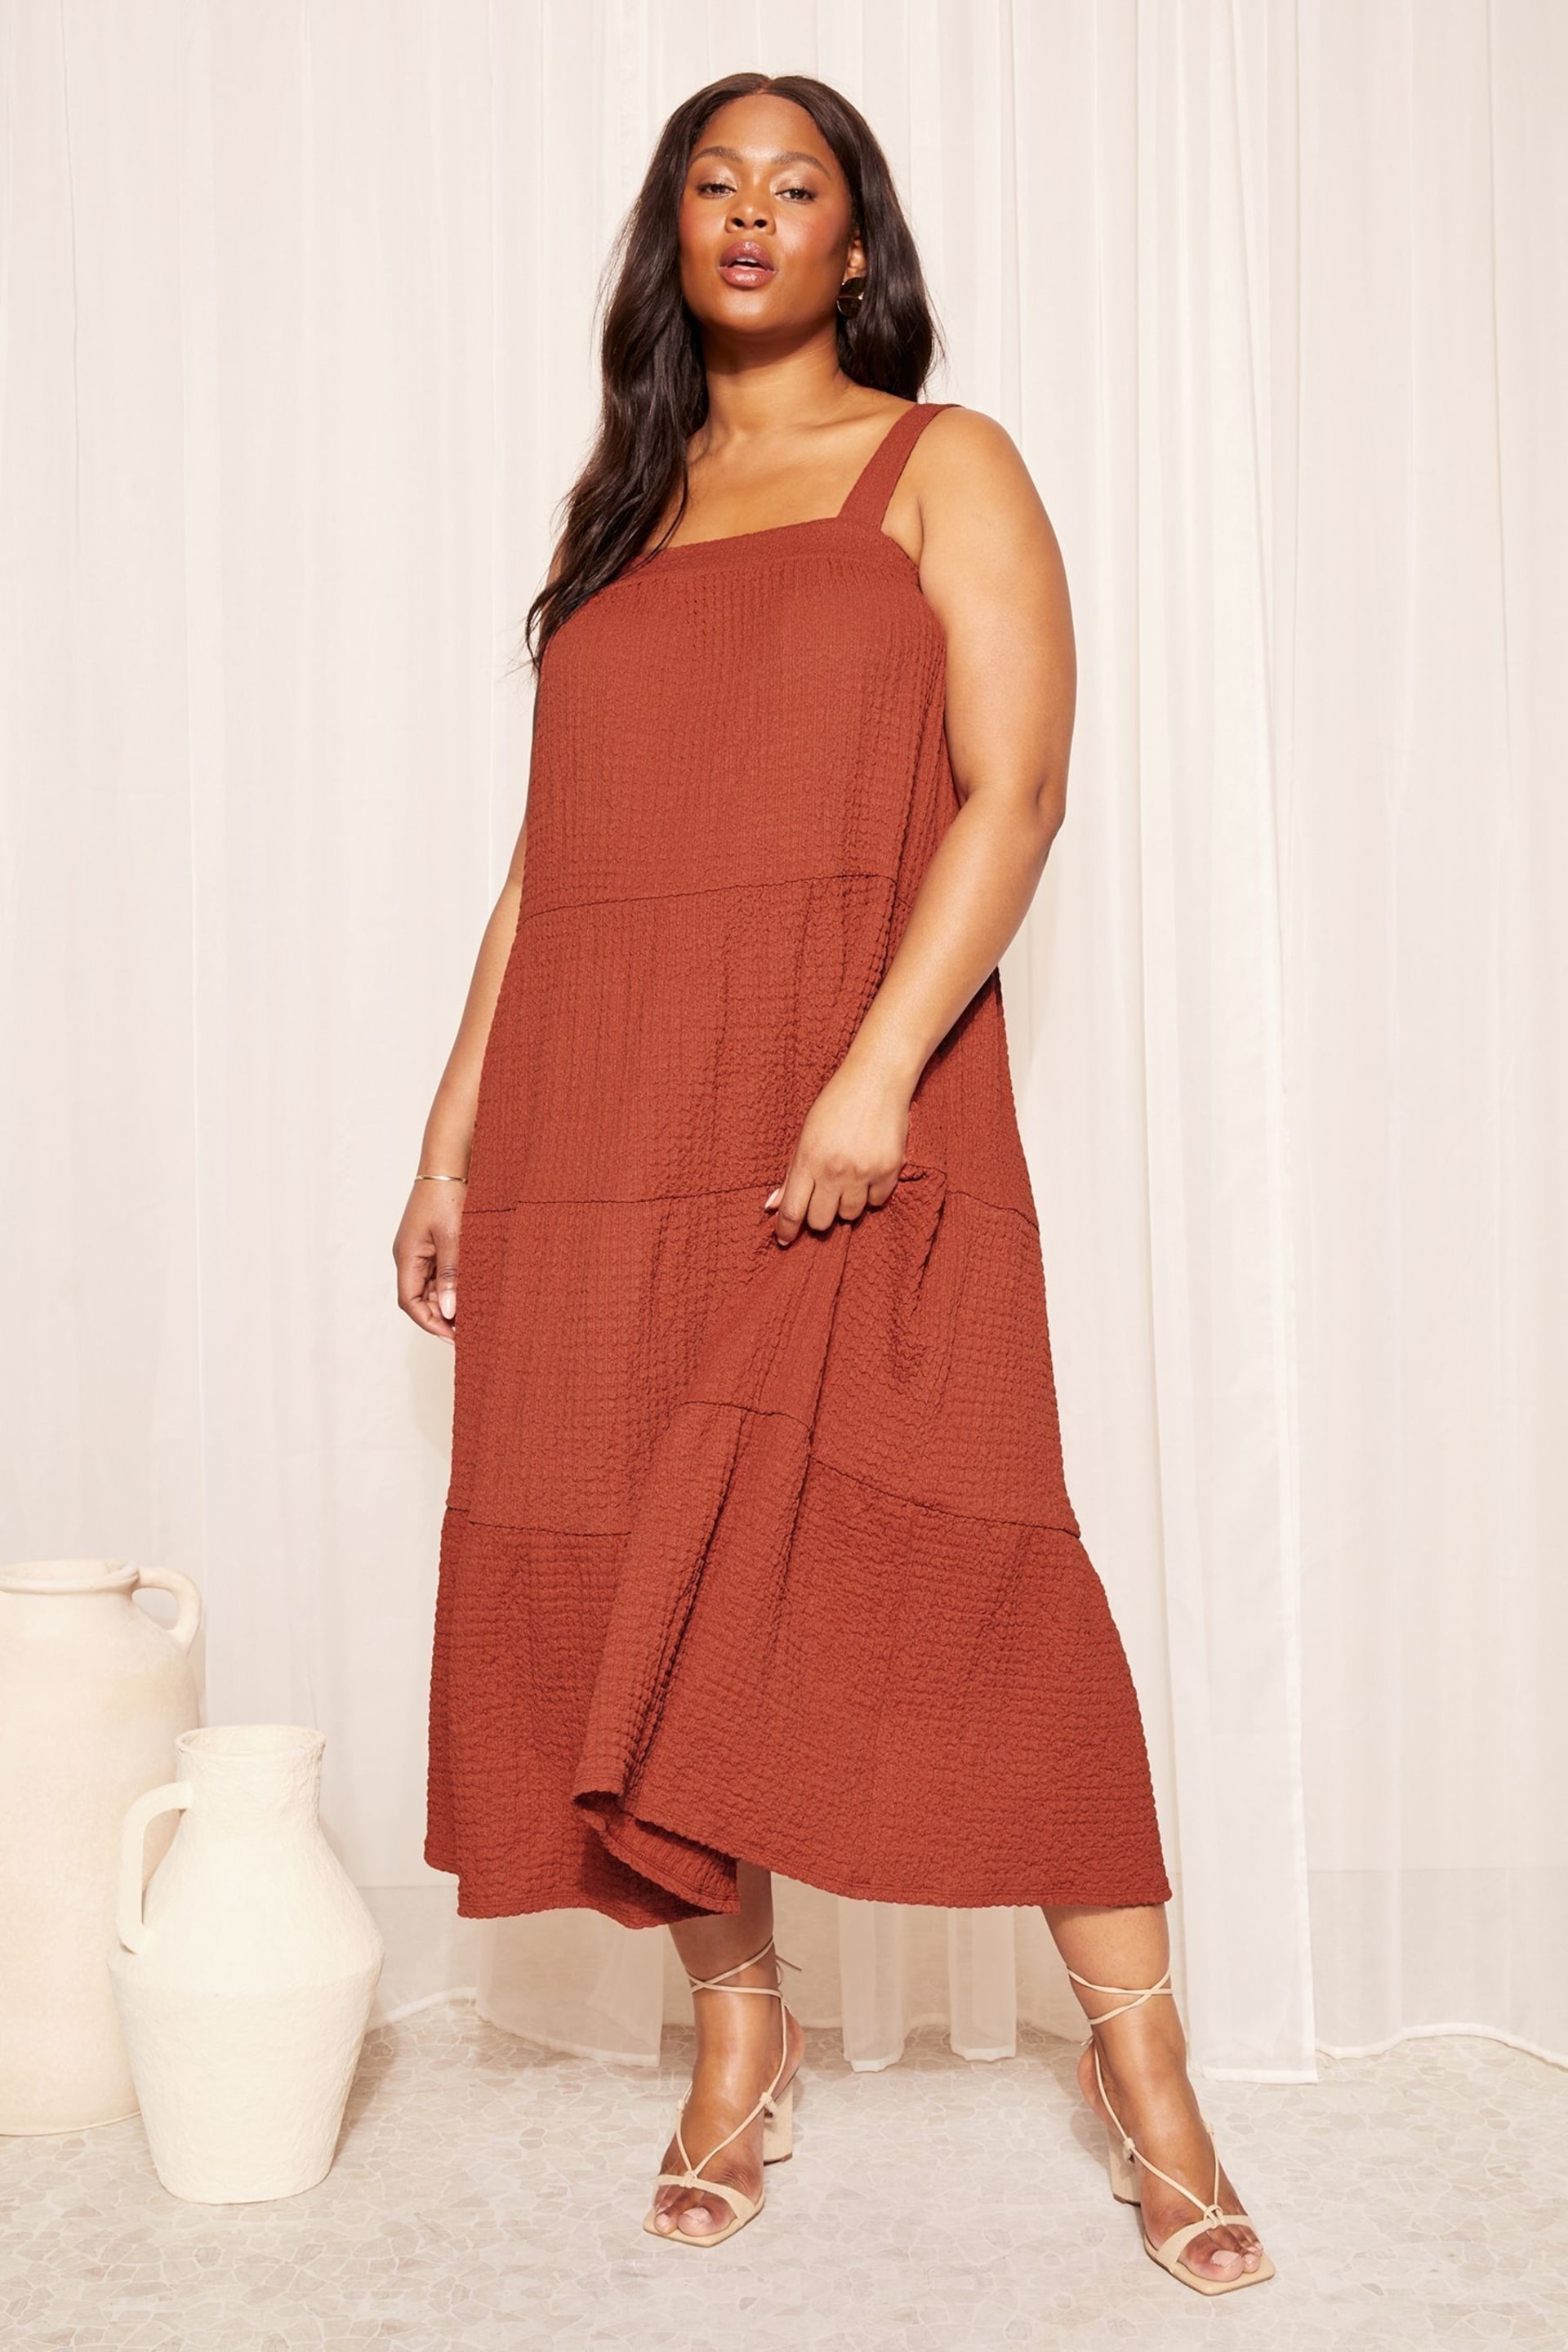 Curves Like These Red Textured Jersey Strappy Midi Dress - Image 3 of 4